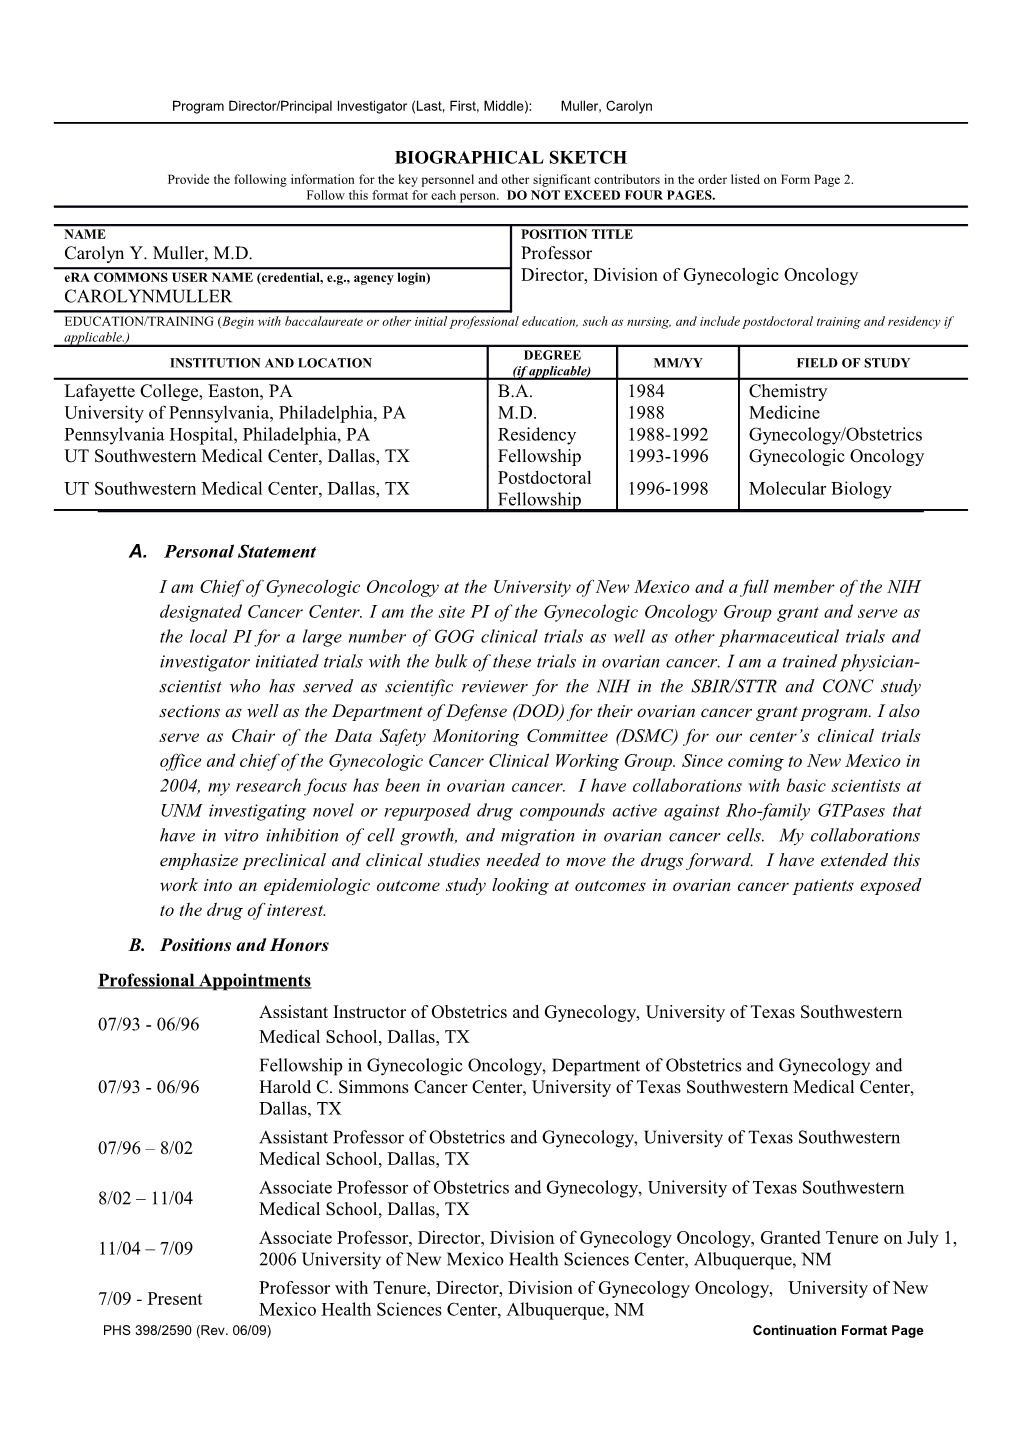 PHS 398 (Rev. 9/04), Biographical Sketch Format Page s18